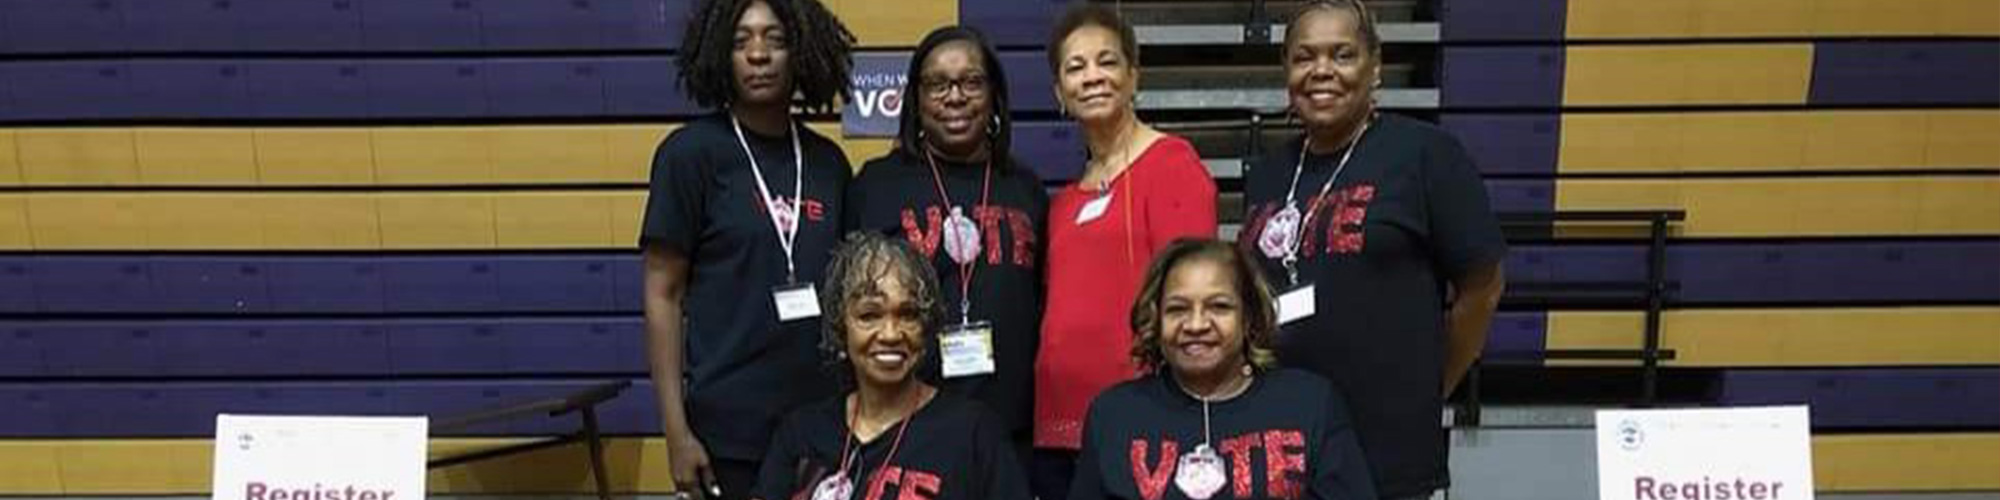 Six members of Delta Sigma Theta members and five wearing black VOTE t-shirts